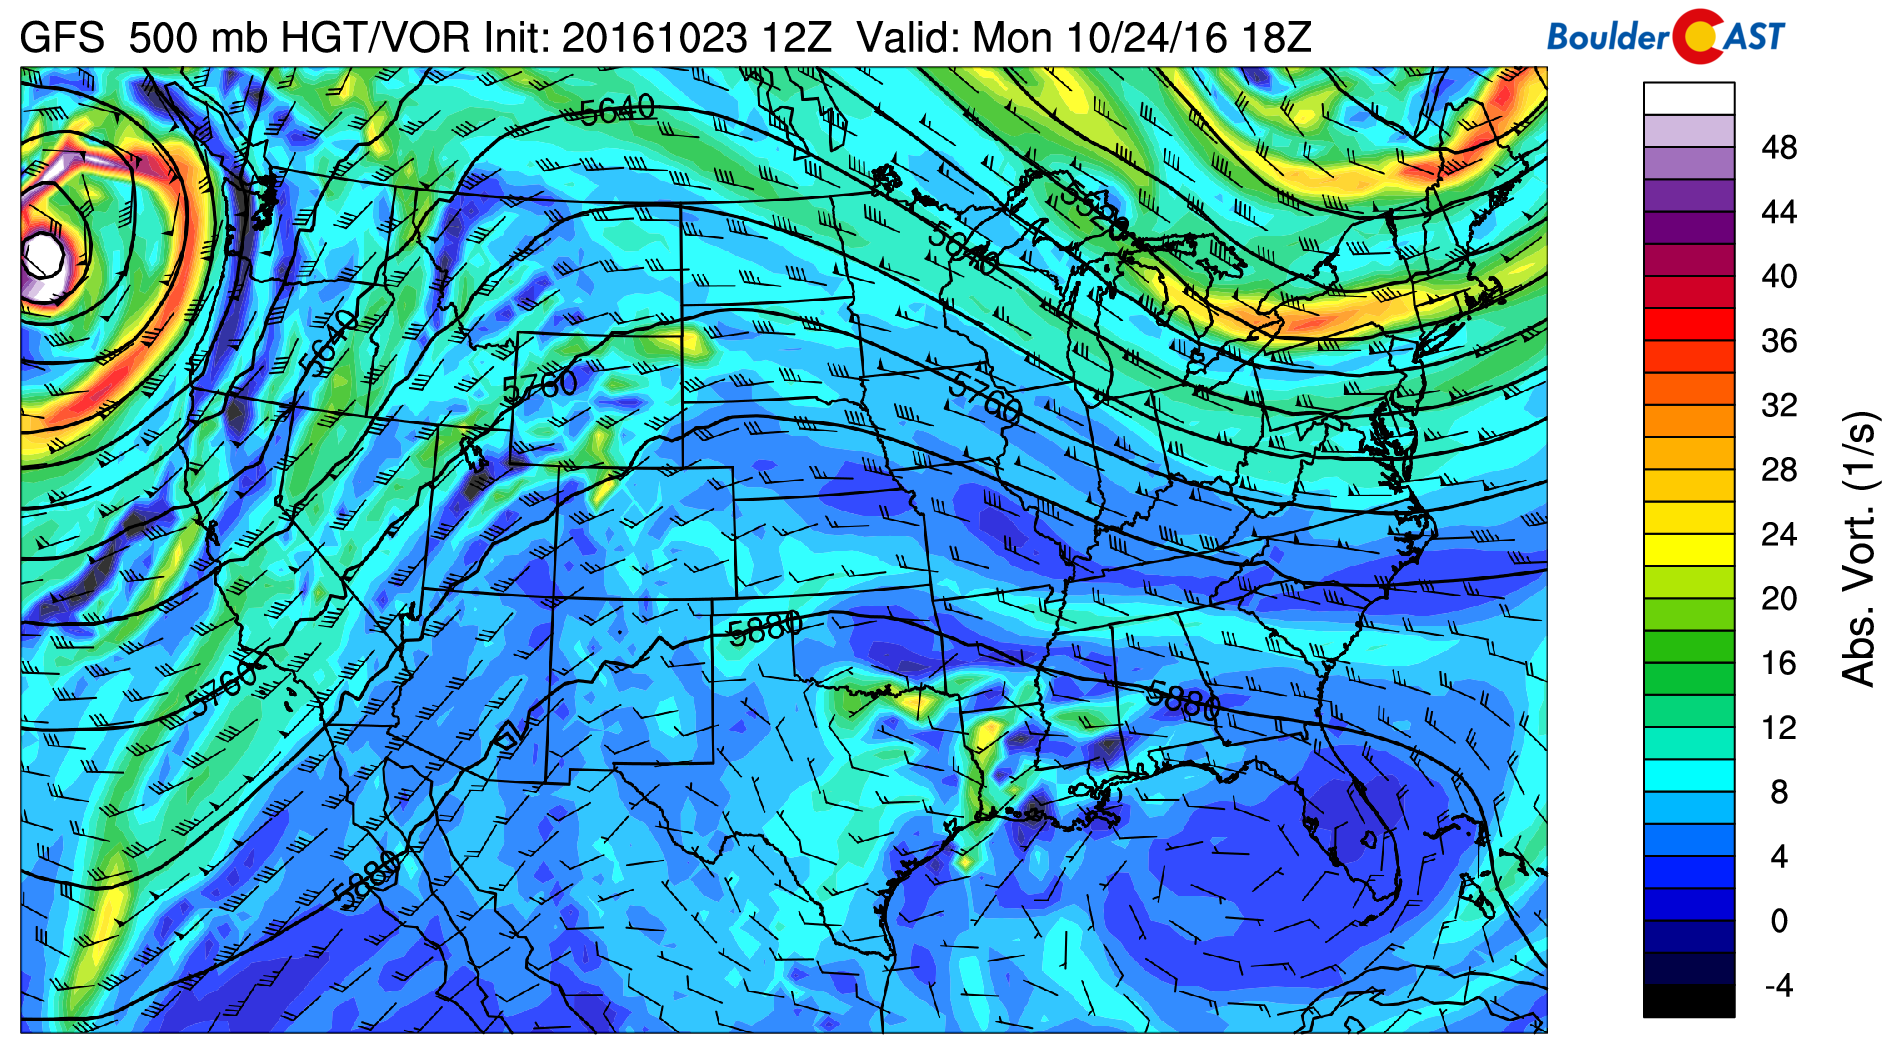 GFS 500 mb vorticity map for Monday